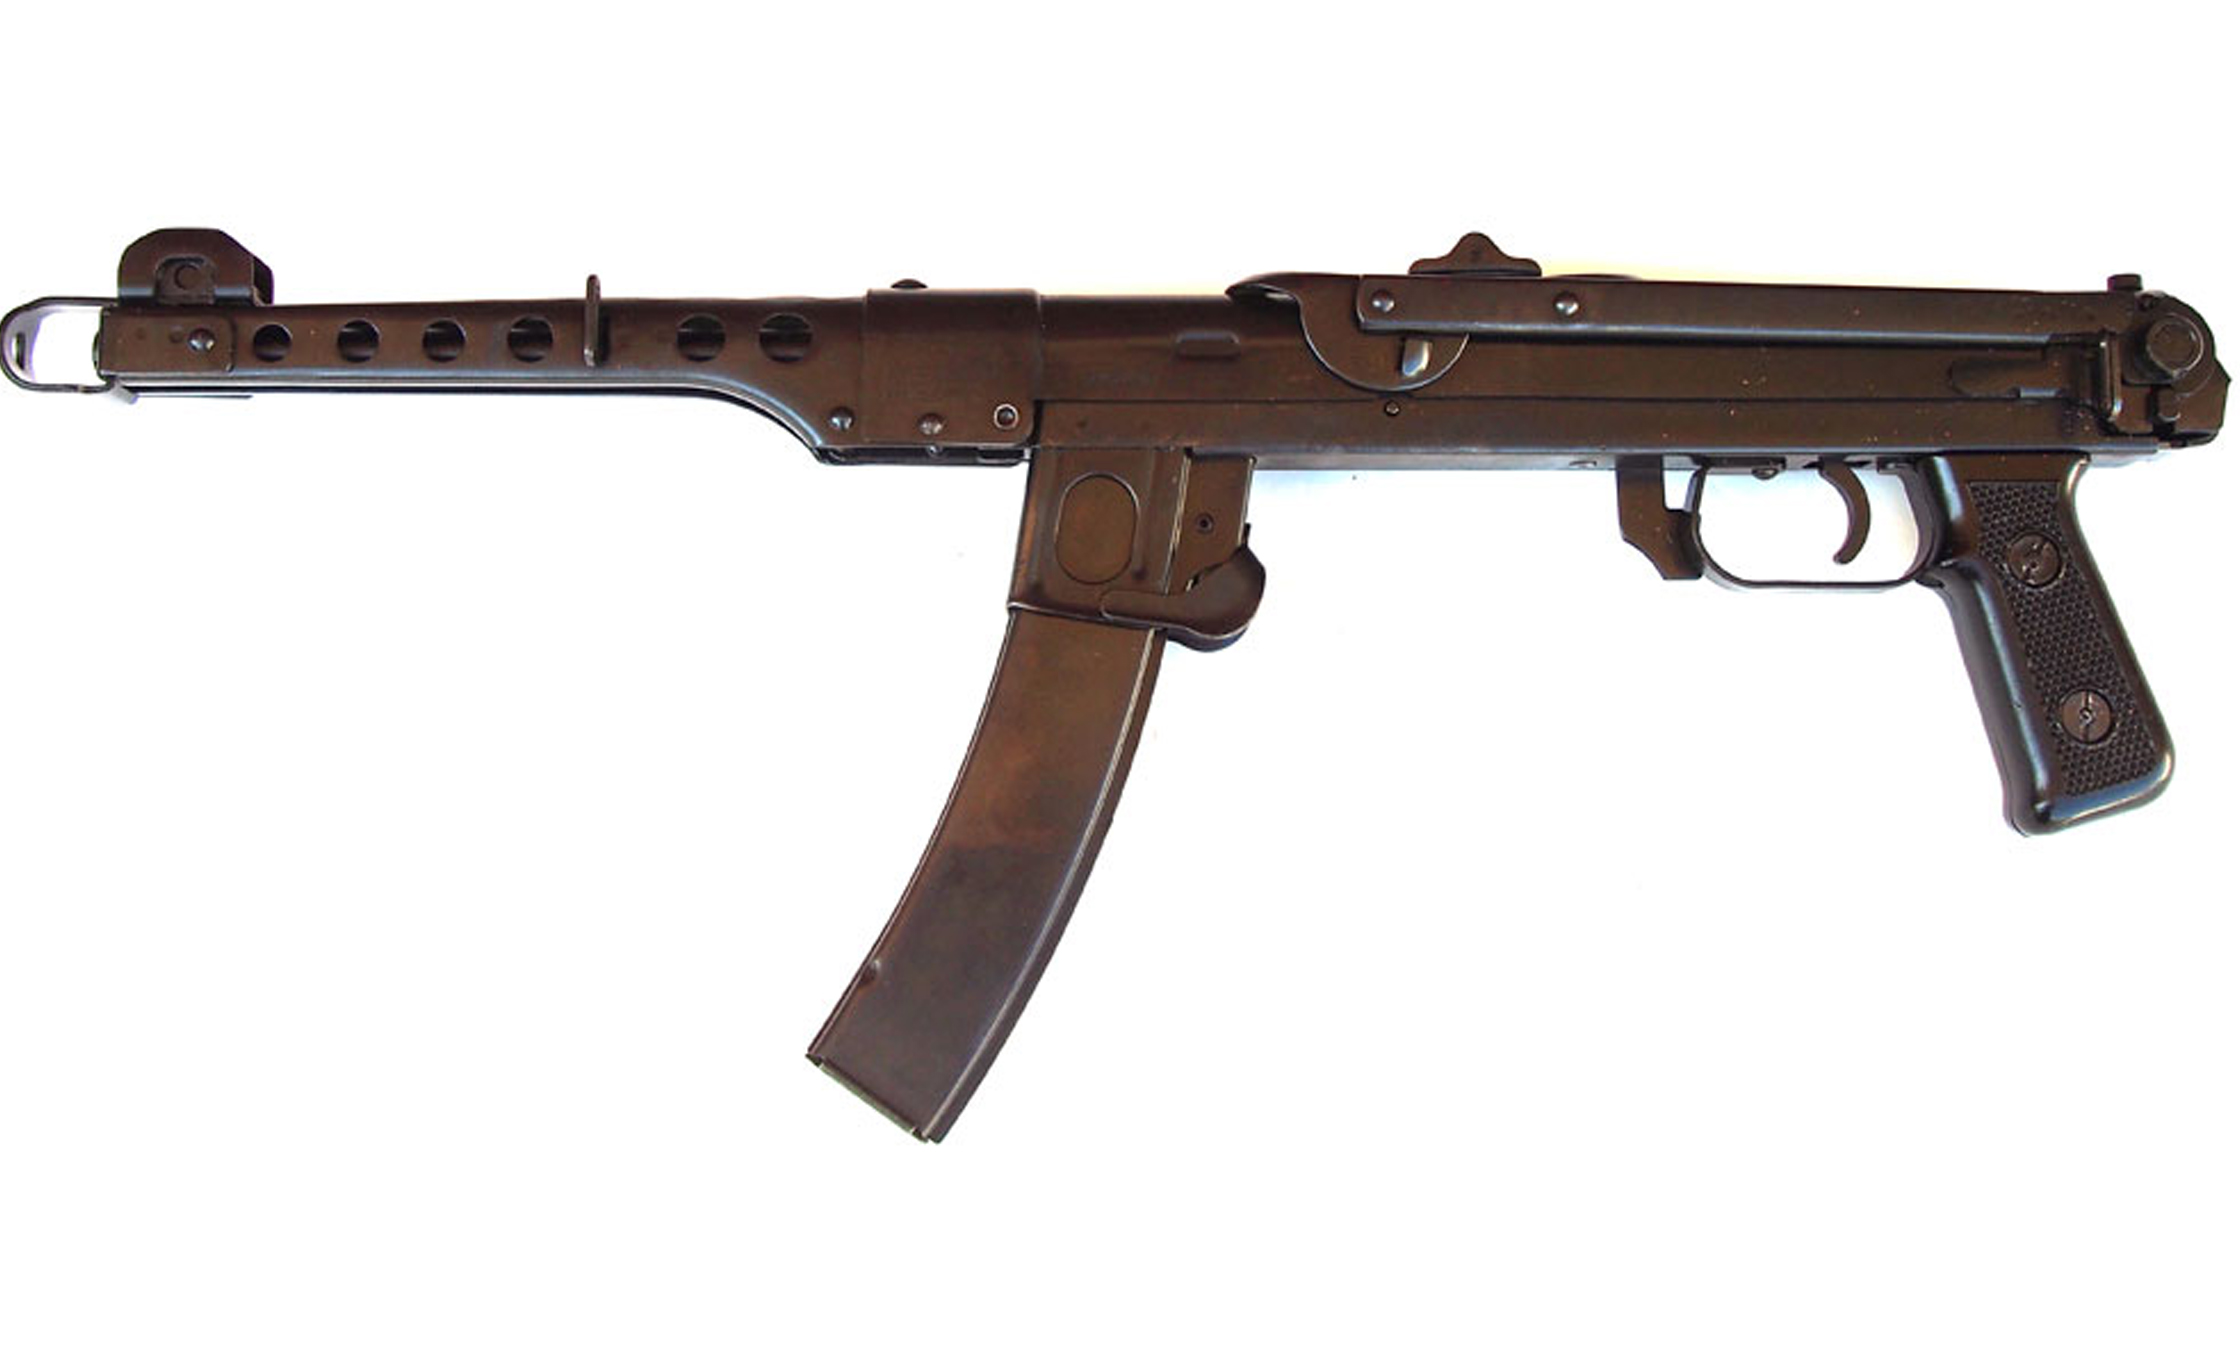 PPSh-41 – the Gun That Saved Mother Russia